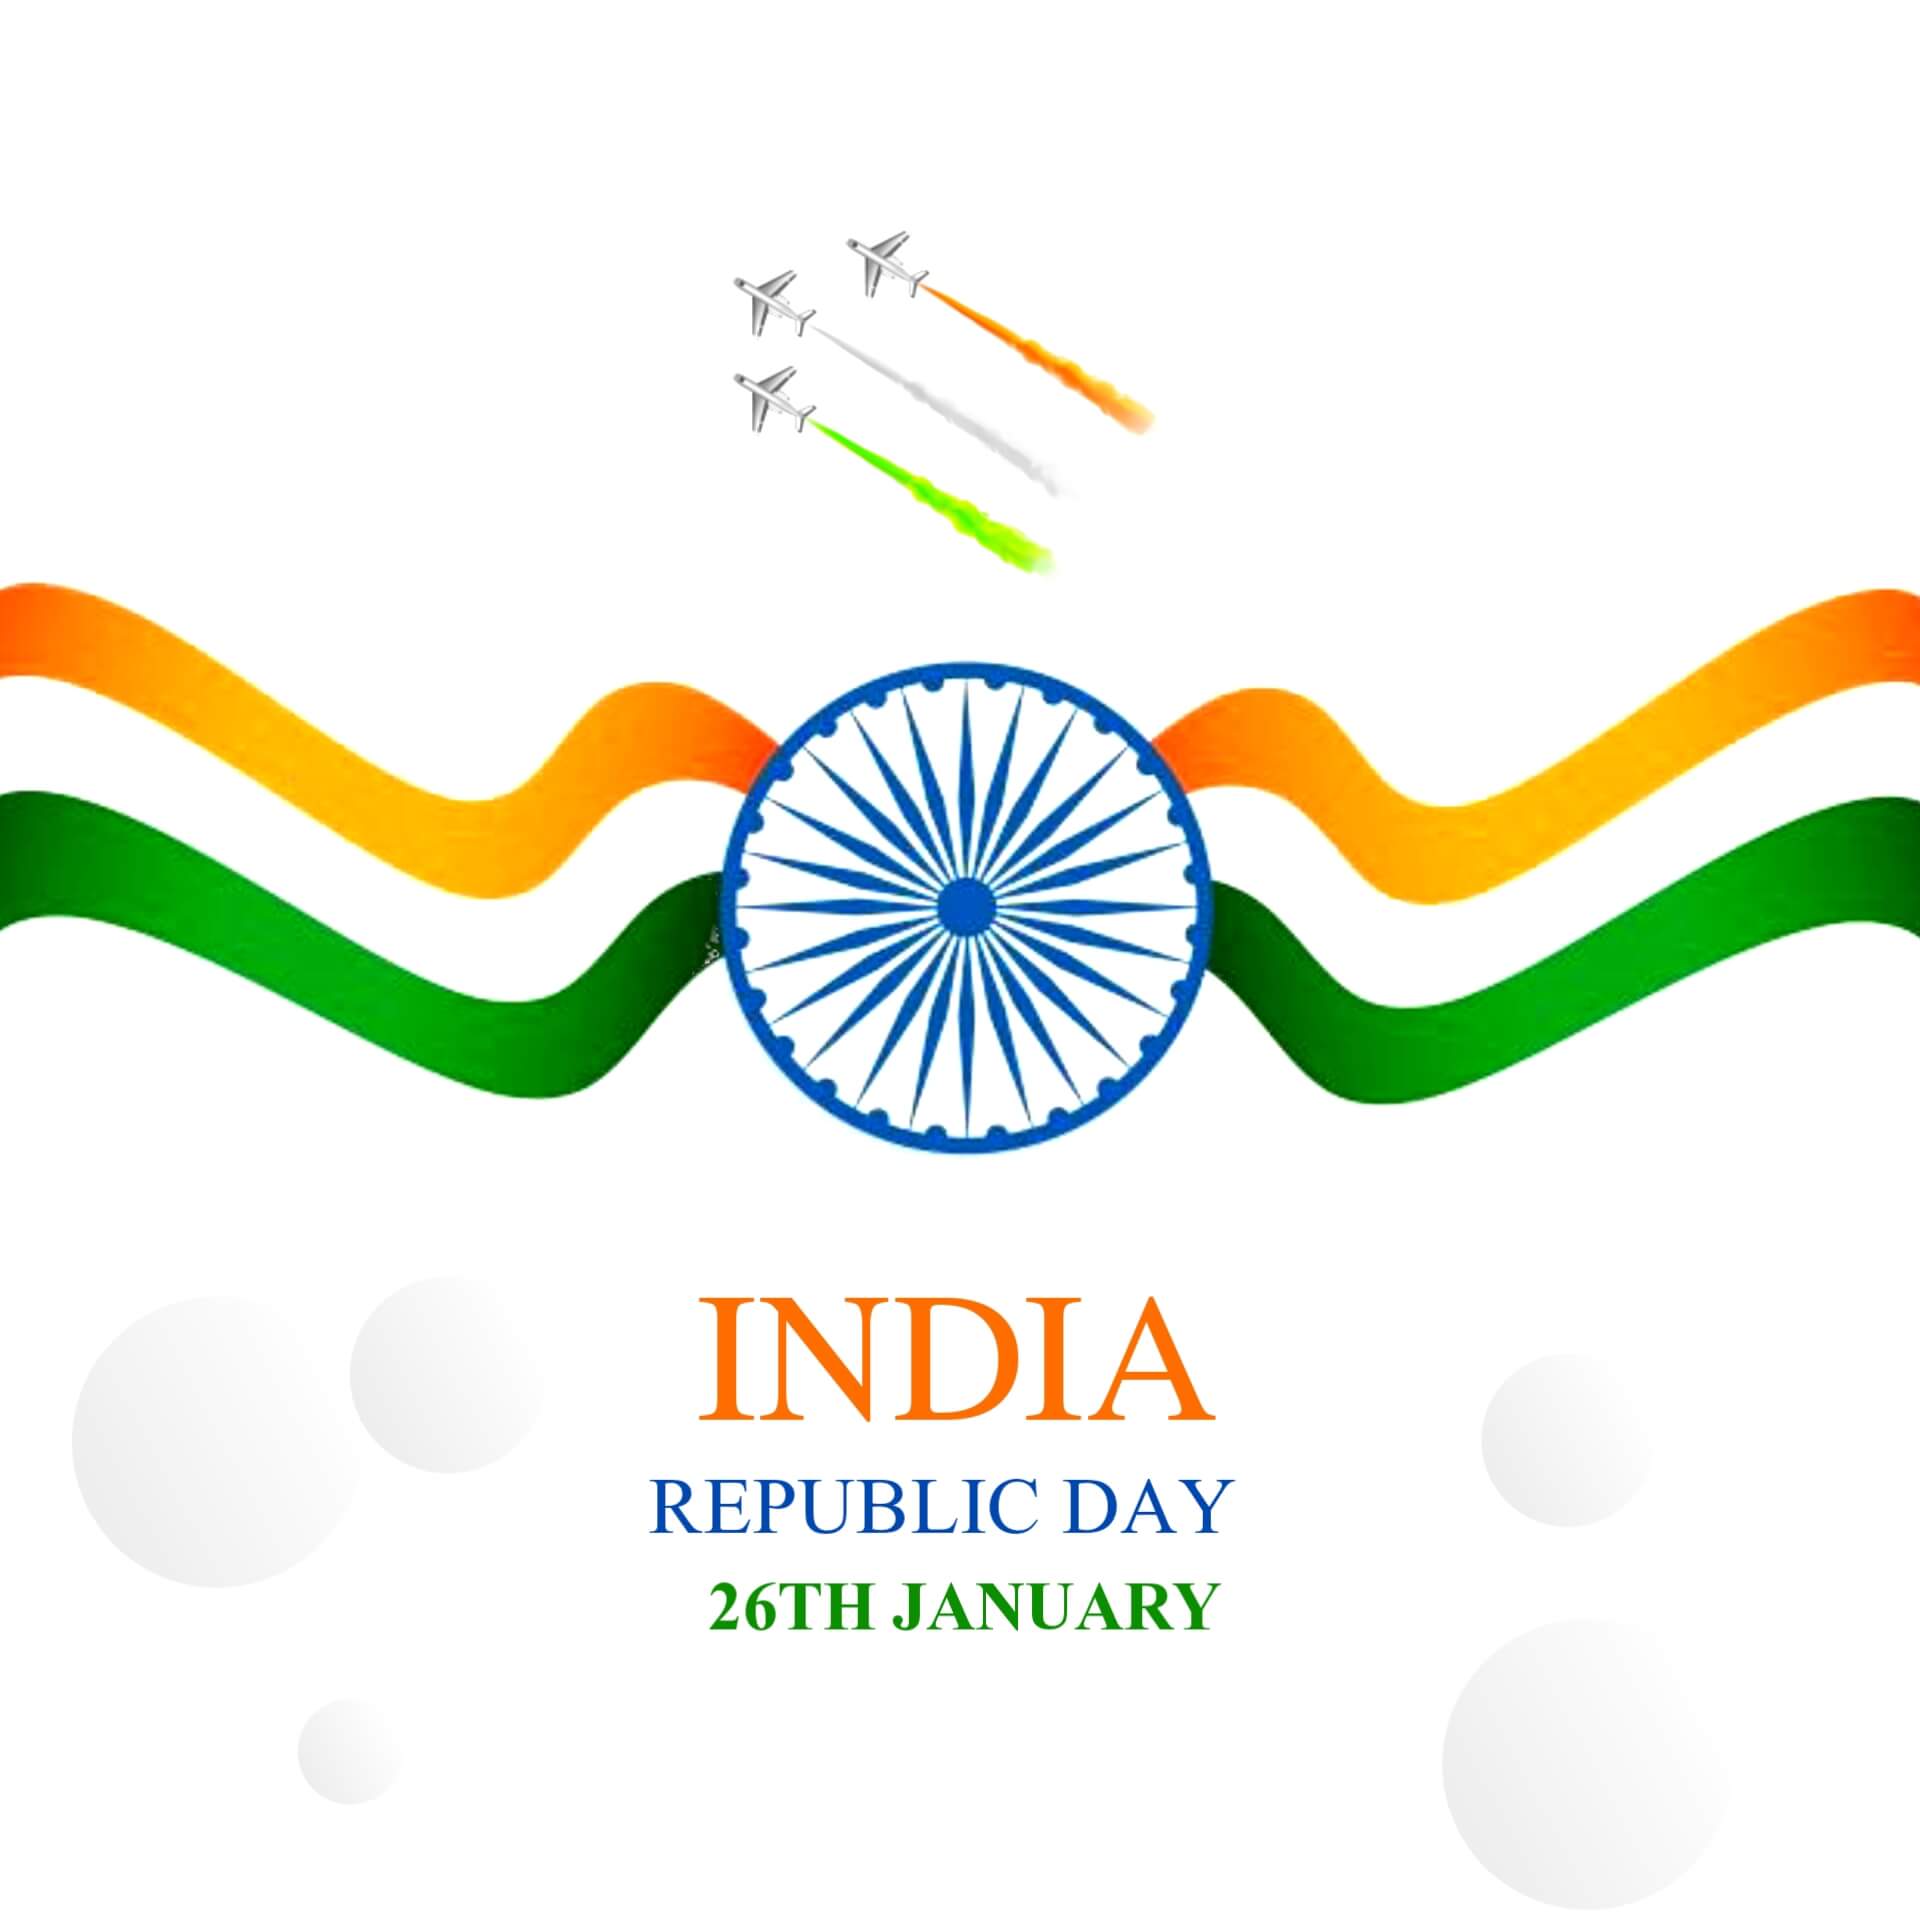 Republic Day Images